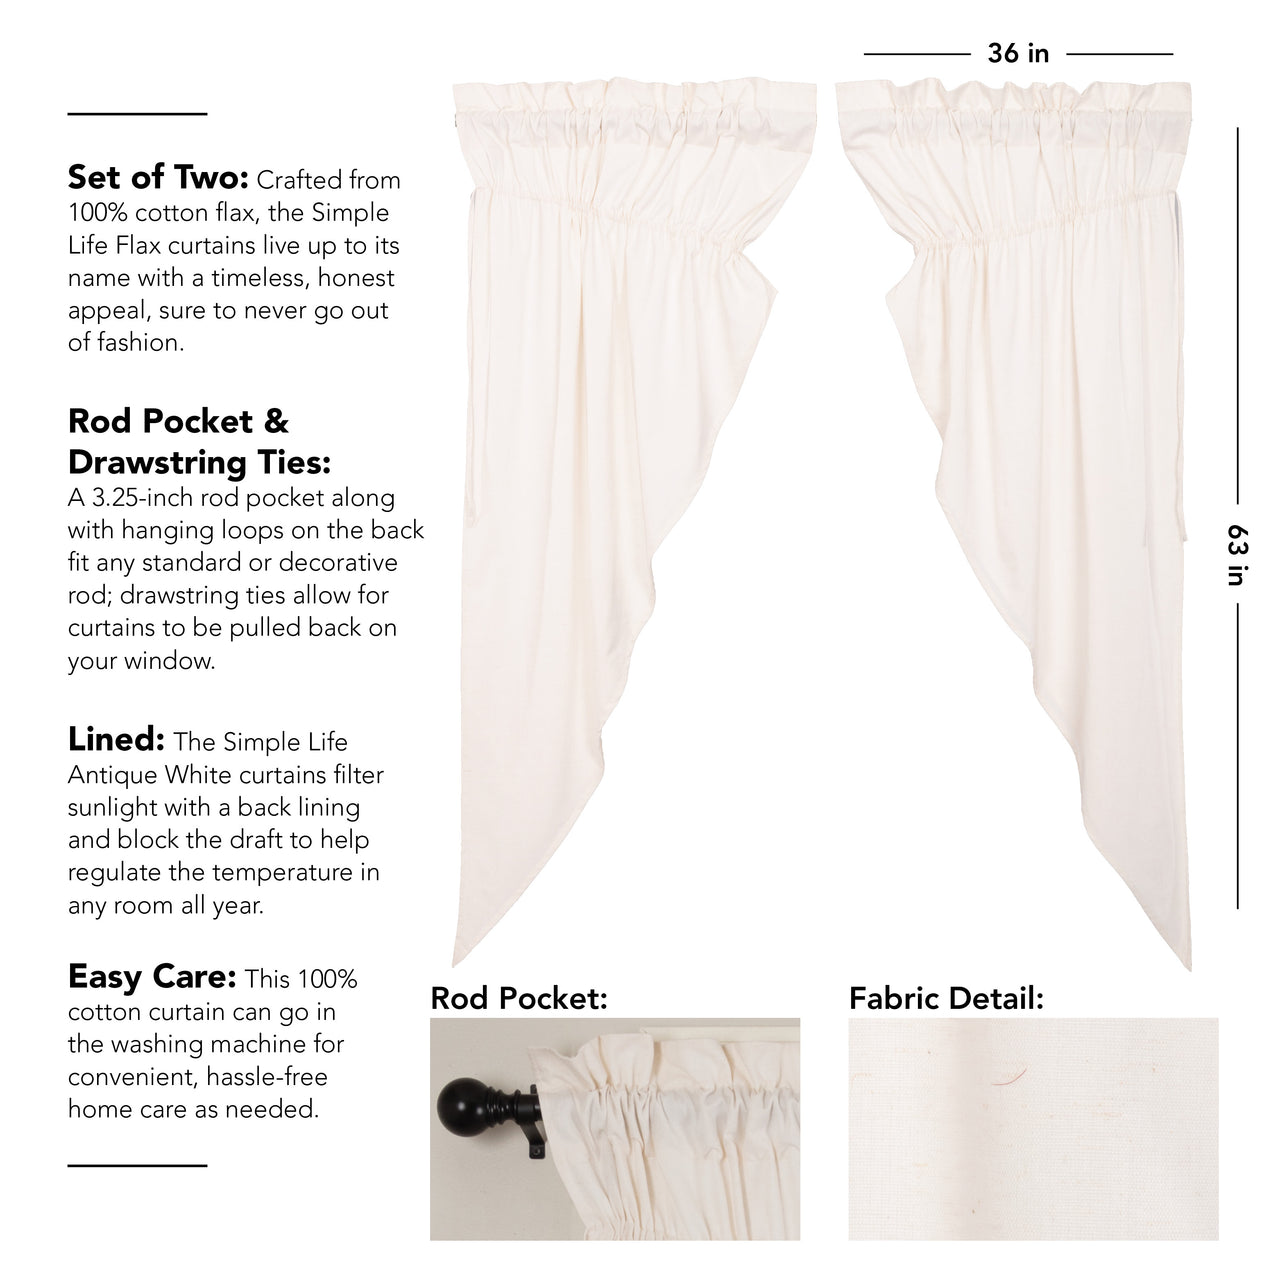 Simple Life Flax Antique White Prairie Short Panel Curtain Set of 2 63x36x18 VHC Brands